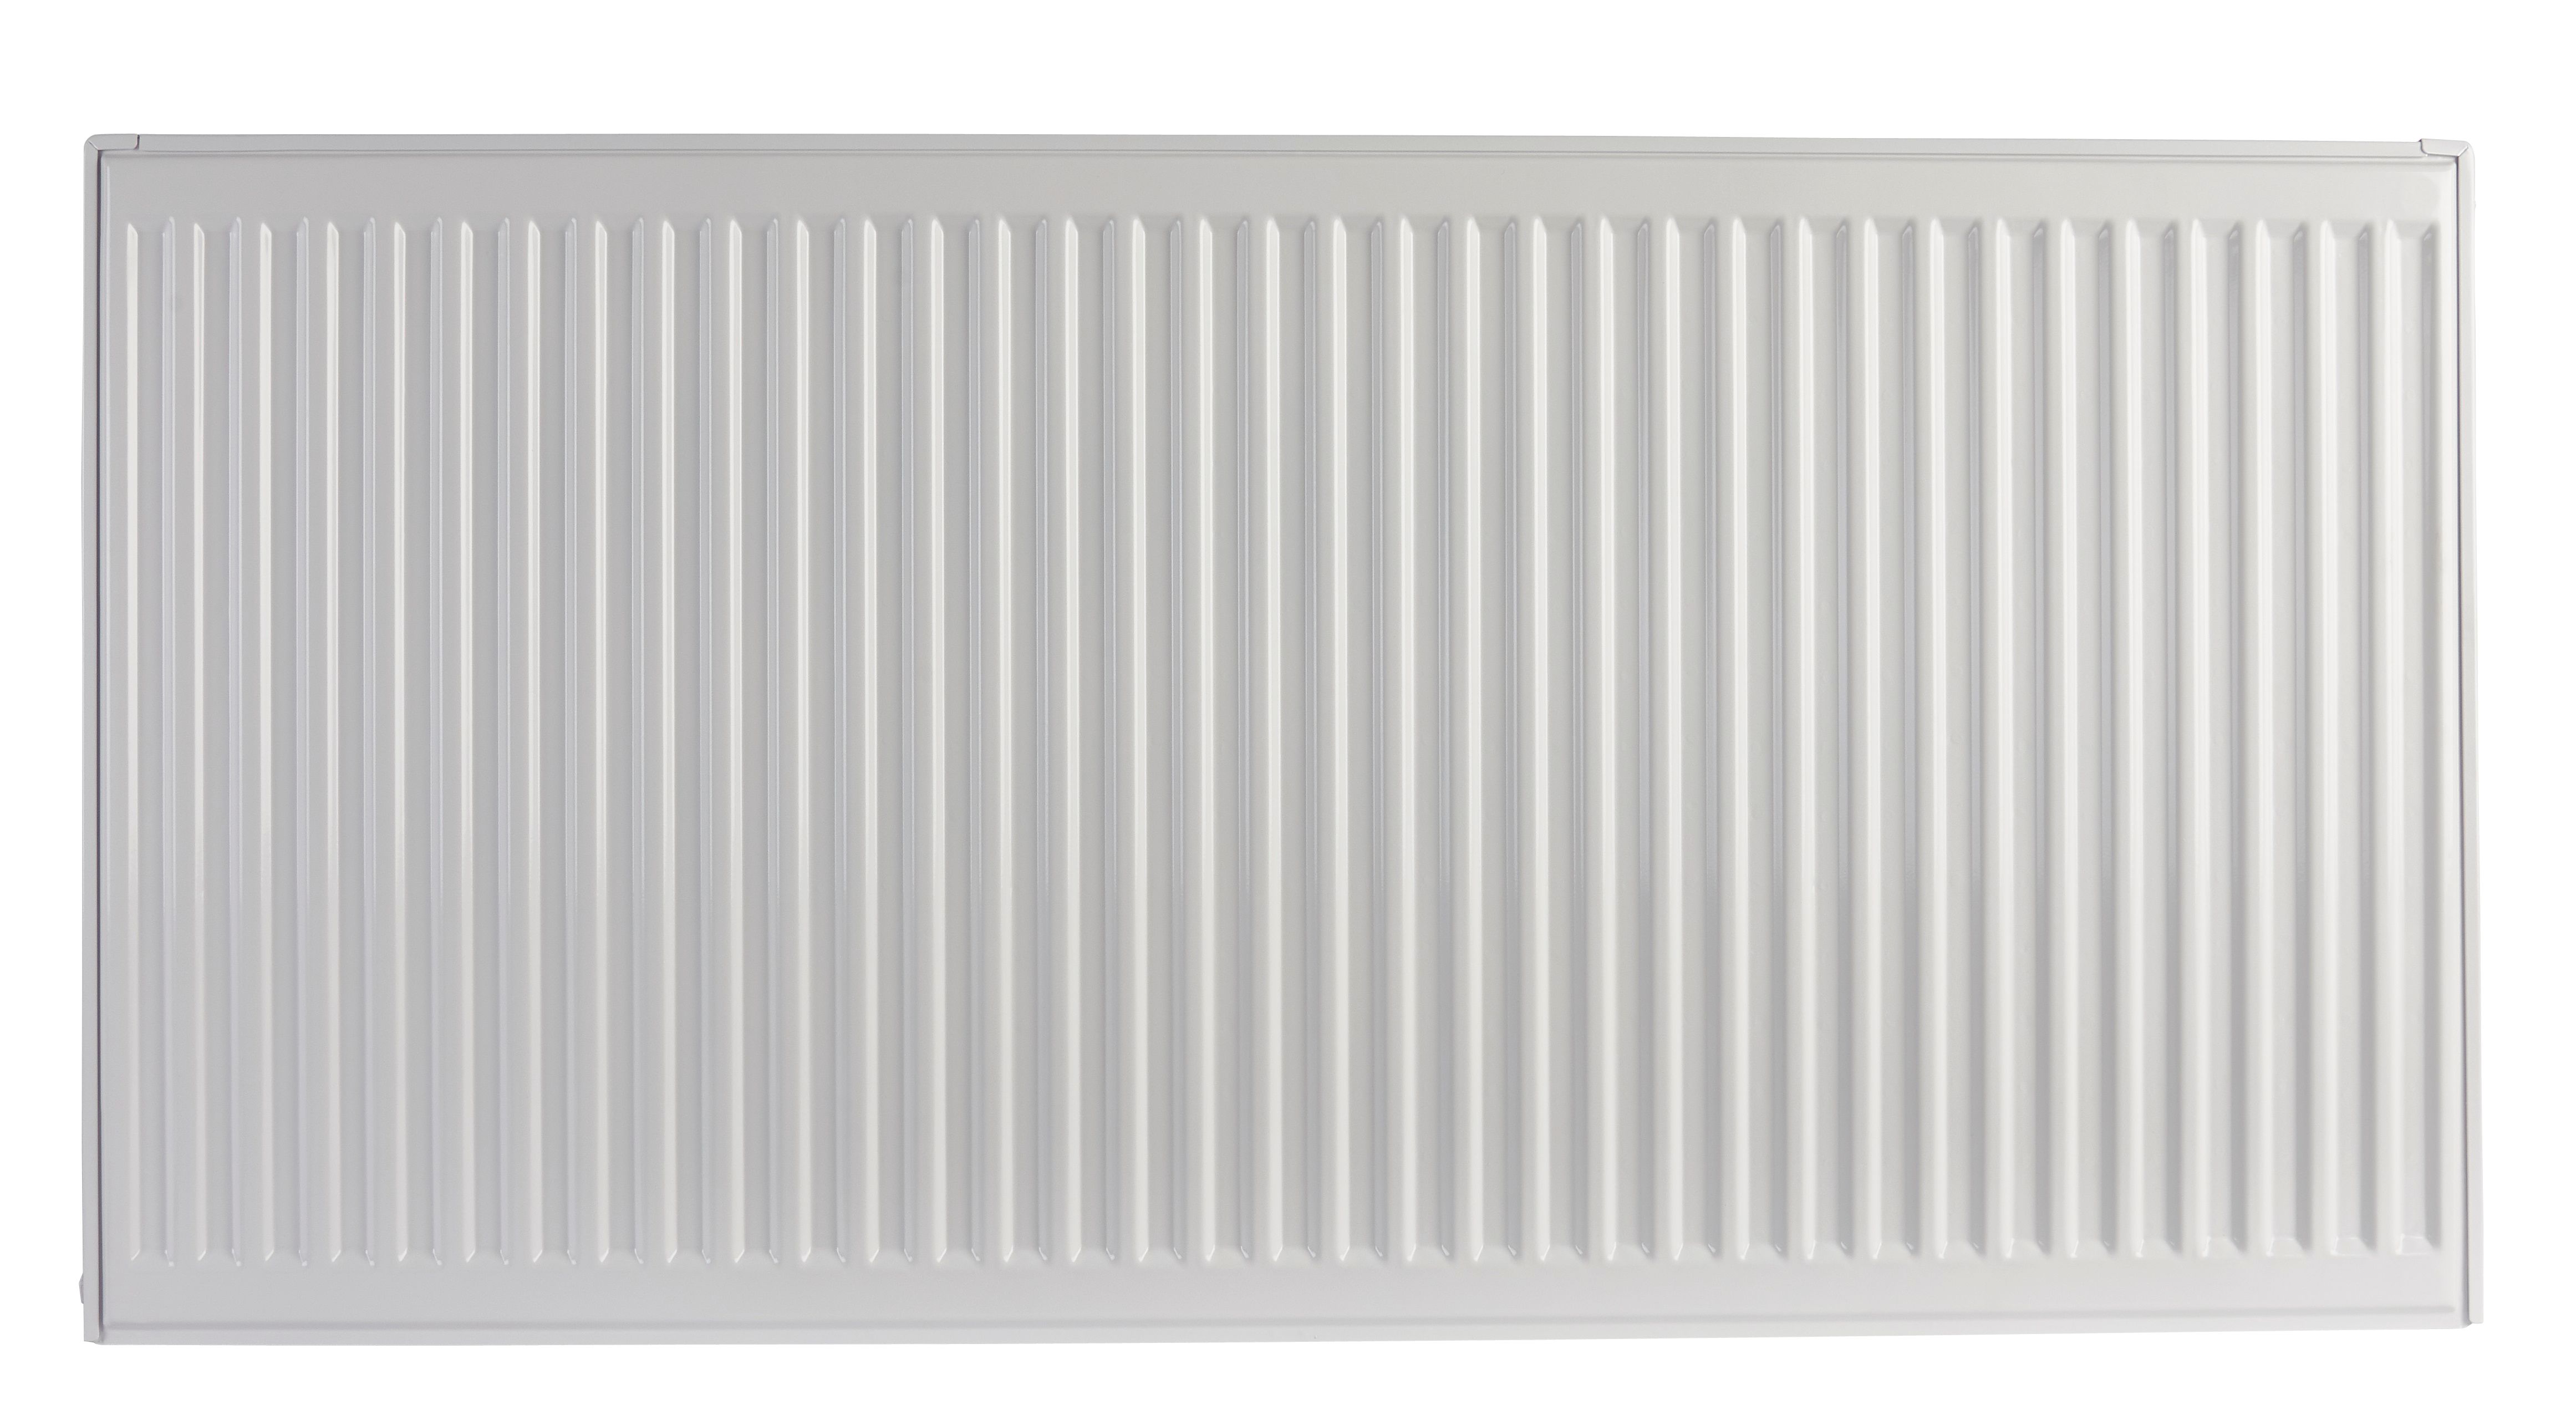 Image of Homeline by Stelrad 700 x 800mm Type 21 Double Panel Plus Single Convector Radiator